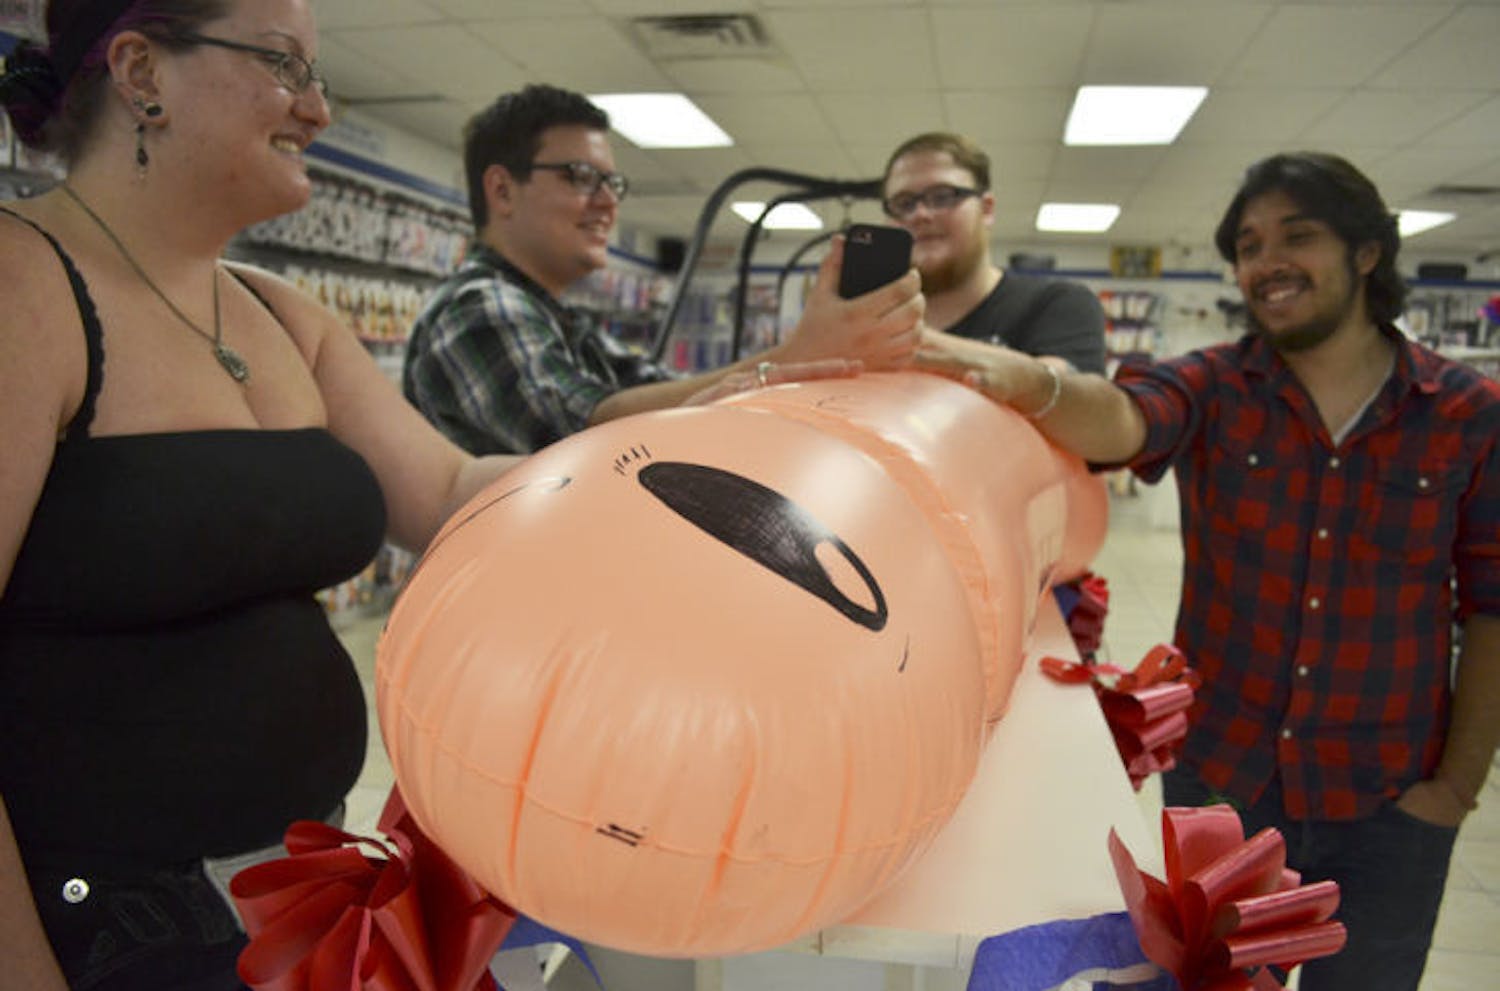 Contestants gather around a five-and-a-half foot long inflated penis for X-Mart’s “Longest Handy Ever Contest” held Saturday at the store.&nbsp;
&nbsp;